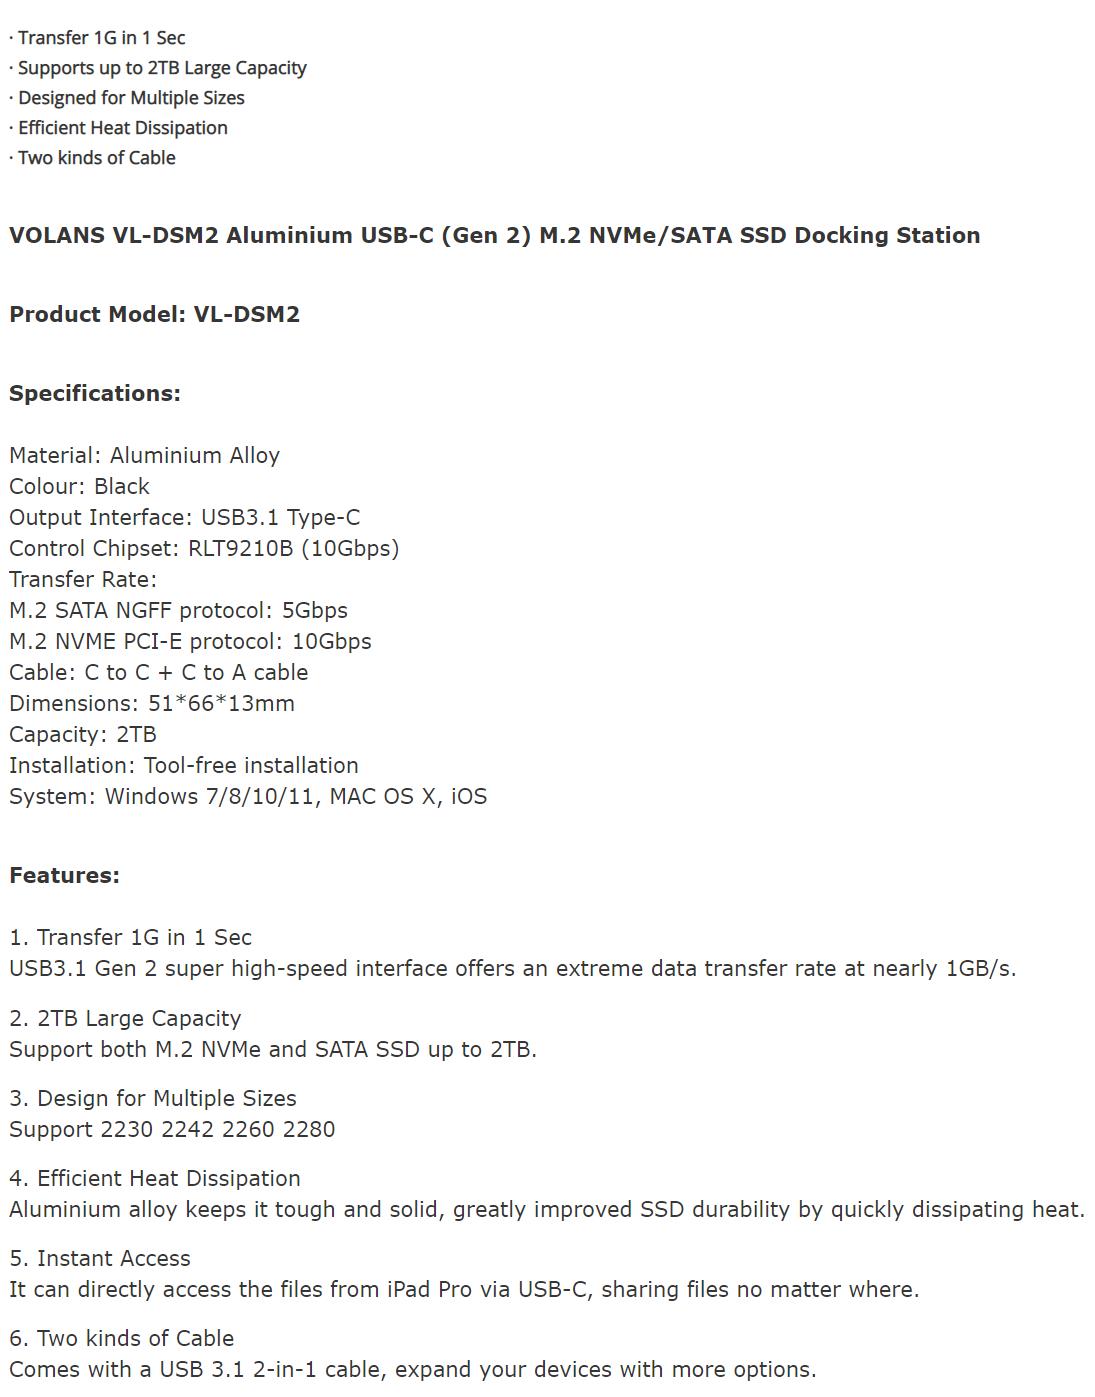 A large marketing image providing additional information about the product Volans DSM2 Aluminium USB-C (Gen 2) M.2 NVMe/SATA SSD Docking Station - Additional alt info not provided